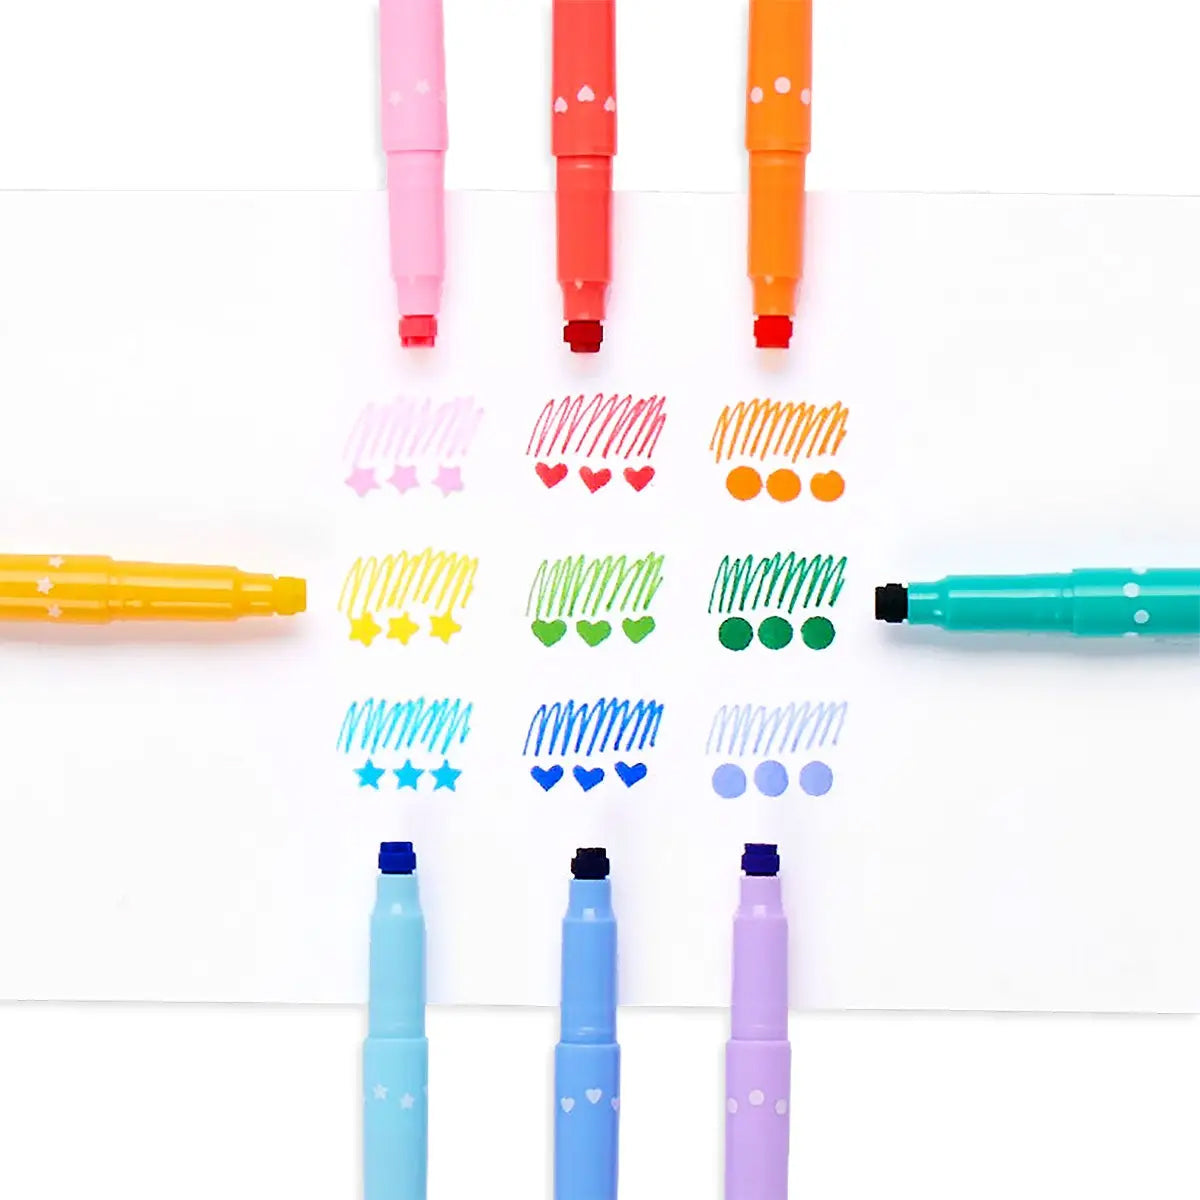 Double ended stamp markers